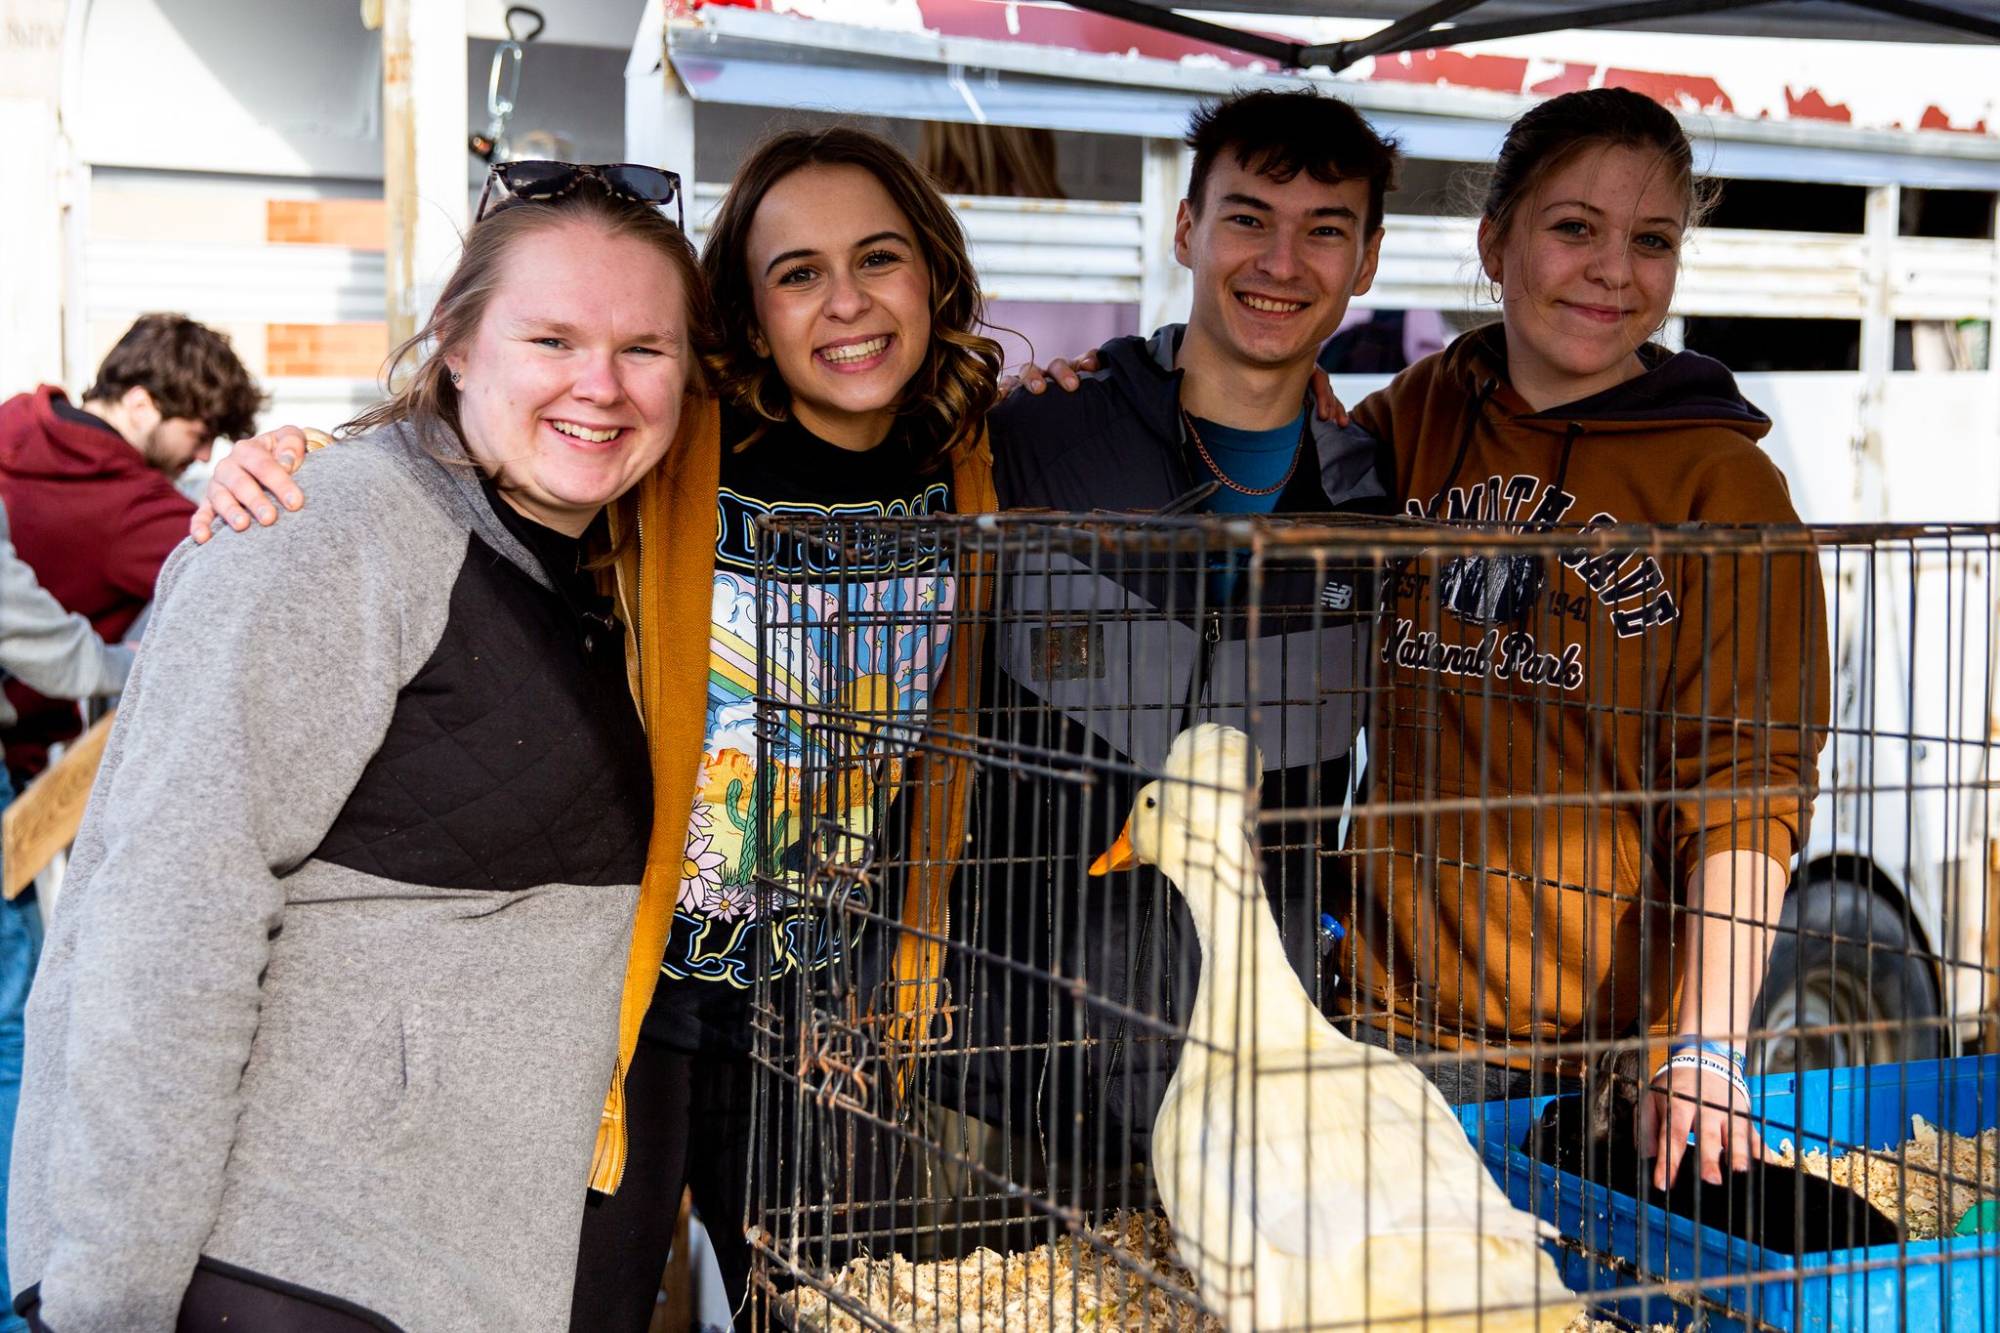 Group photo with a chicken